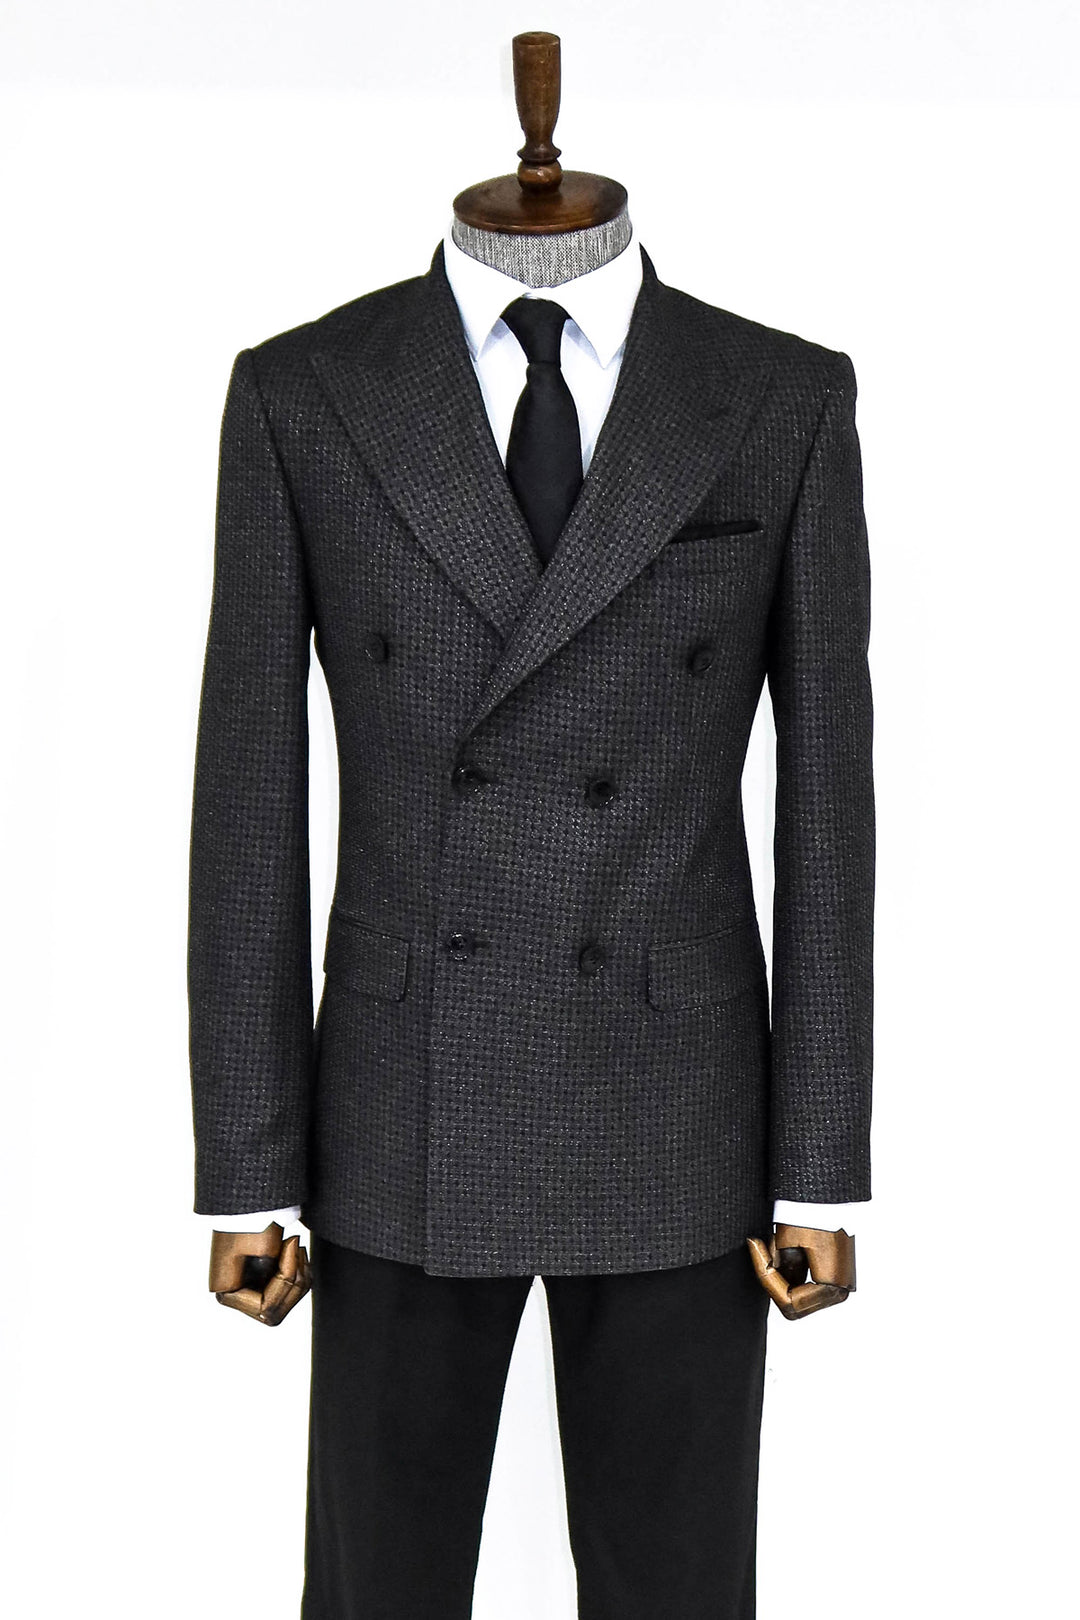 Houndstooth Patterned Grey Men Double Breasted Blazer - Wessi